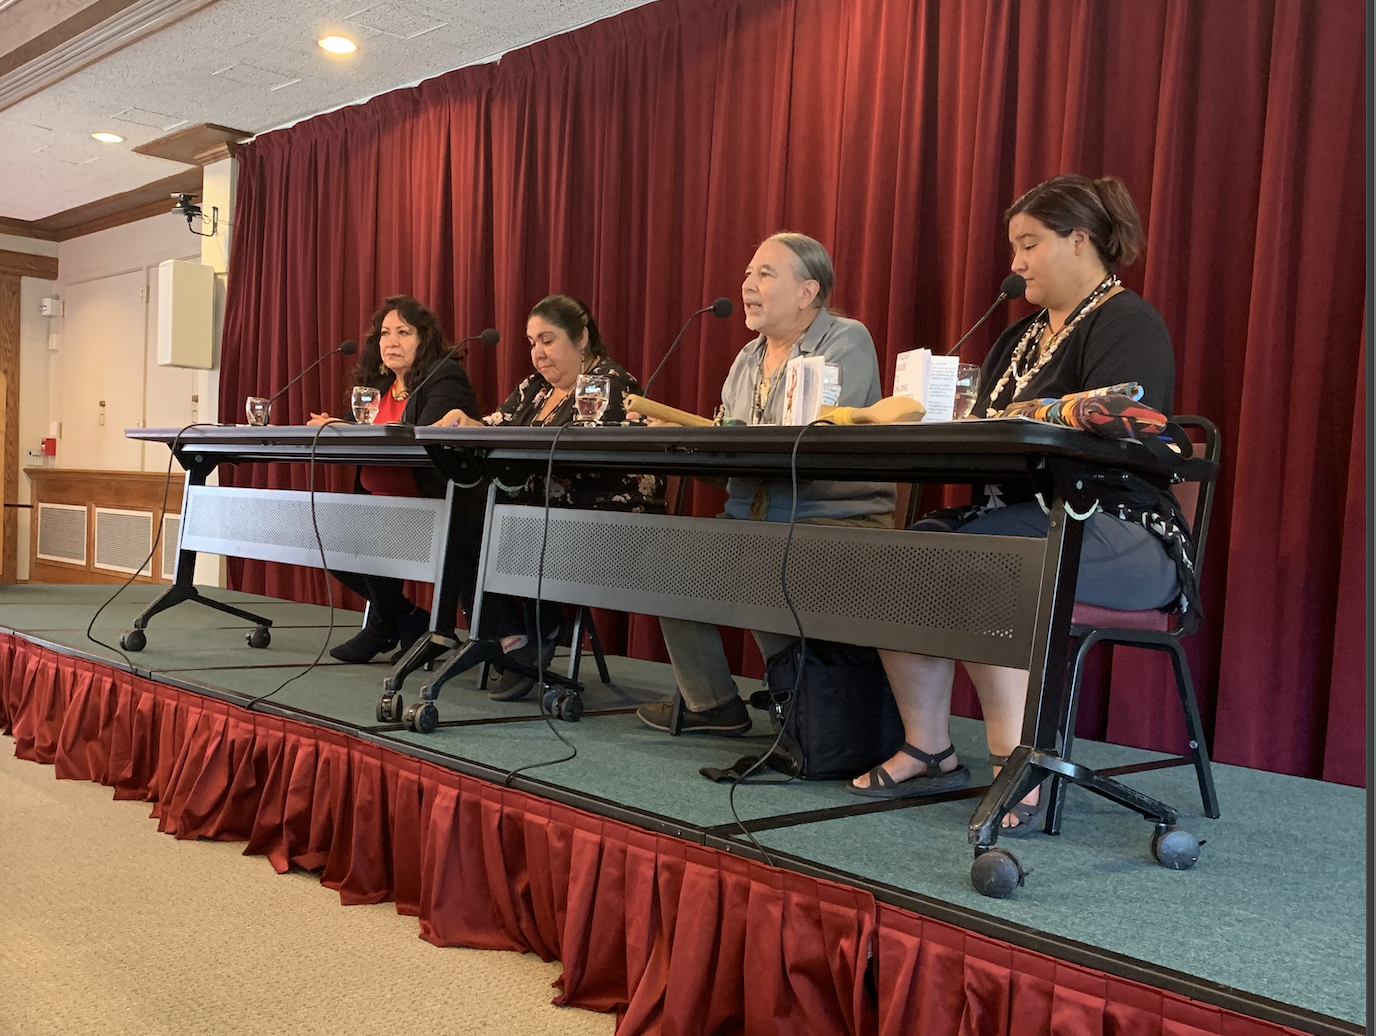 Panelists giving a Red Tawks workshop on Land Acknowledgement, October 9, 2019